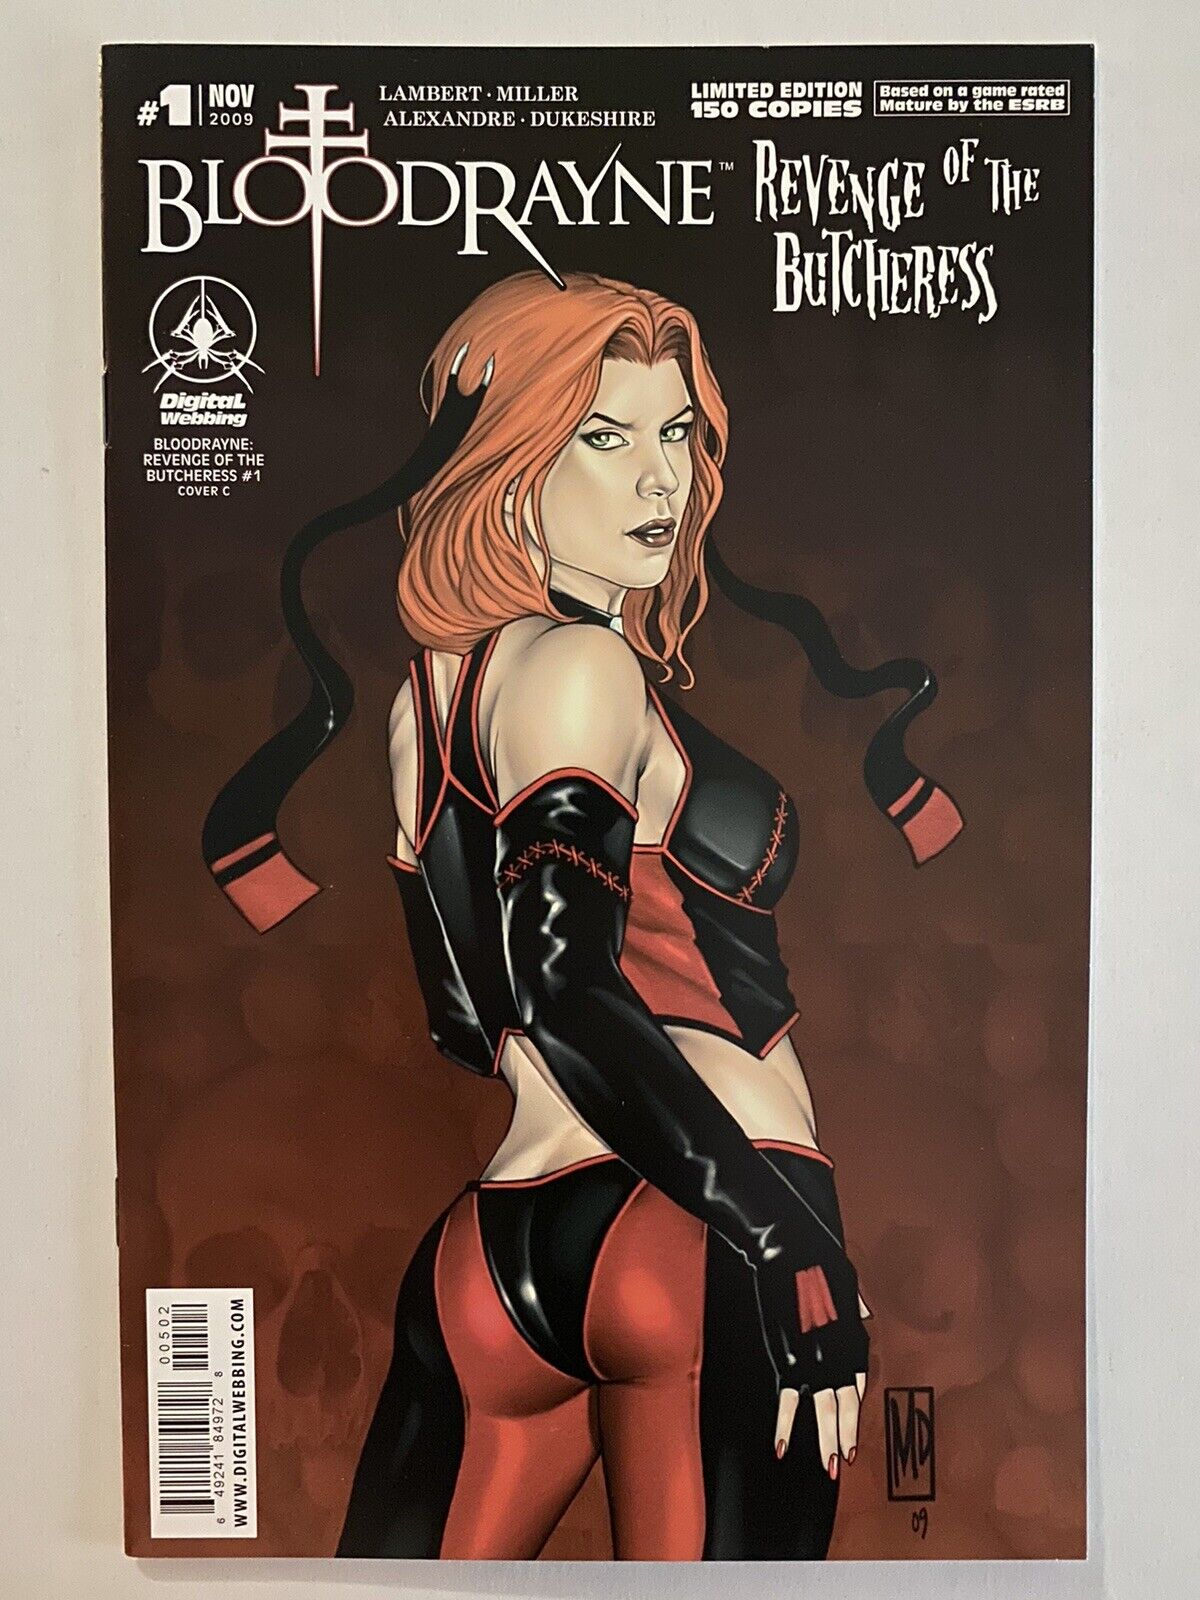 Bloodrayne Revenge of The Butcheress #1 Variant Comic Book Limited to 150 copies